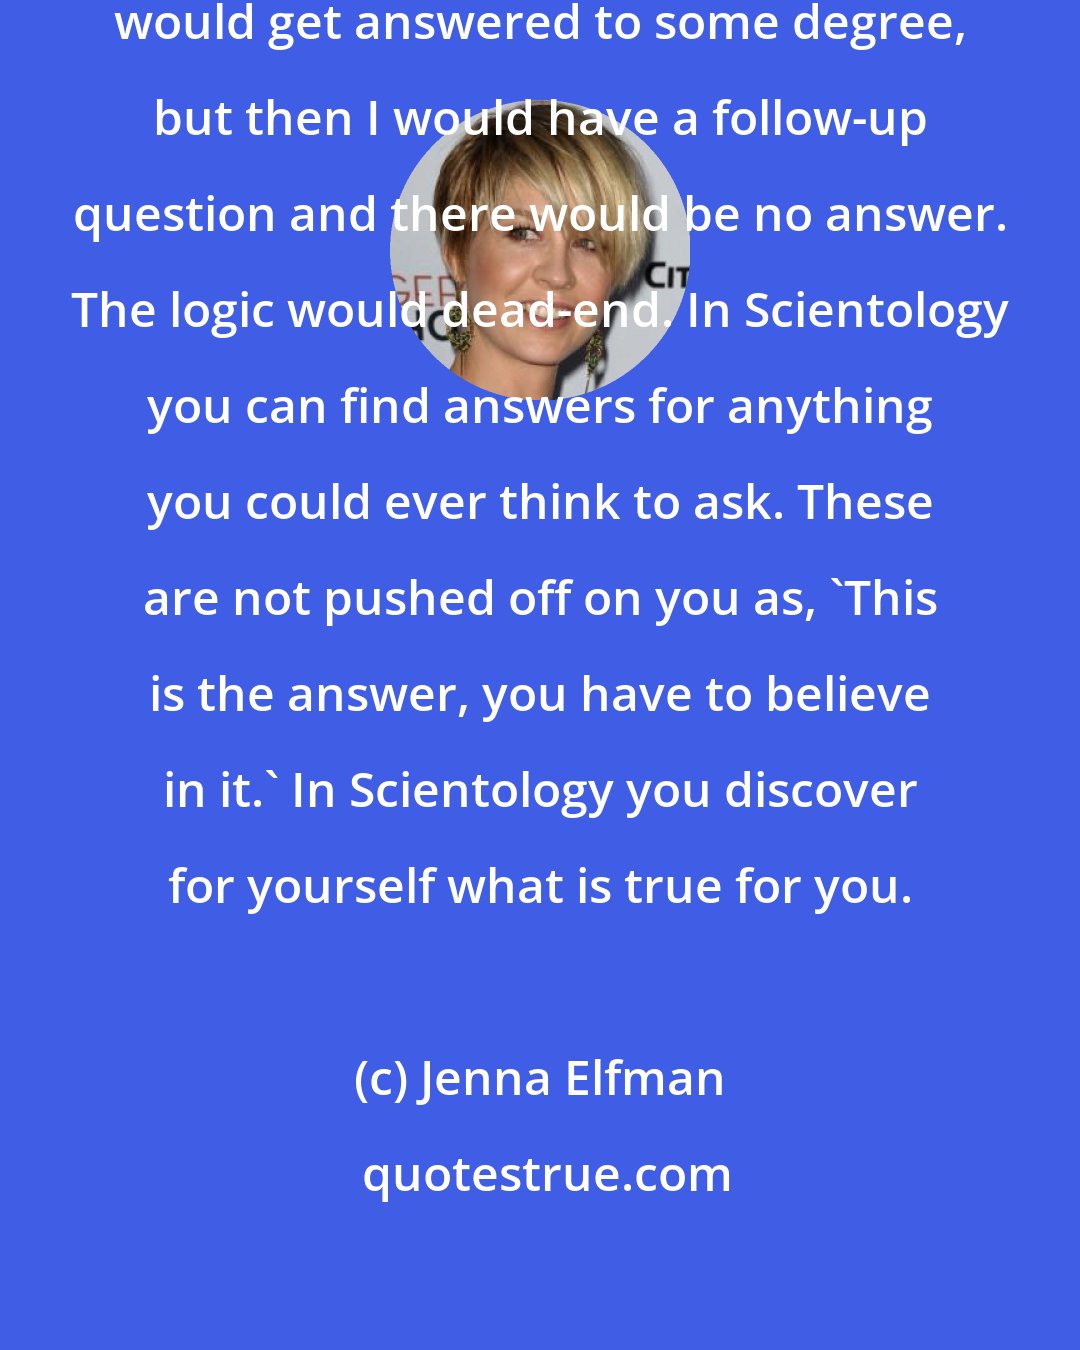 Jenna Elfman: In other philosophies, my questions would get answered to some degree, but then I would have a follow-up question and there would be no answer. The logic would dead-end. In Scientology you can find answers for anything you could ever think to ask. These are not pushed off on you as, 'This is the answer, you have to believe in it.' In Scientology you discover for yourself what is true for you.